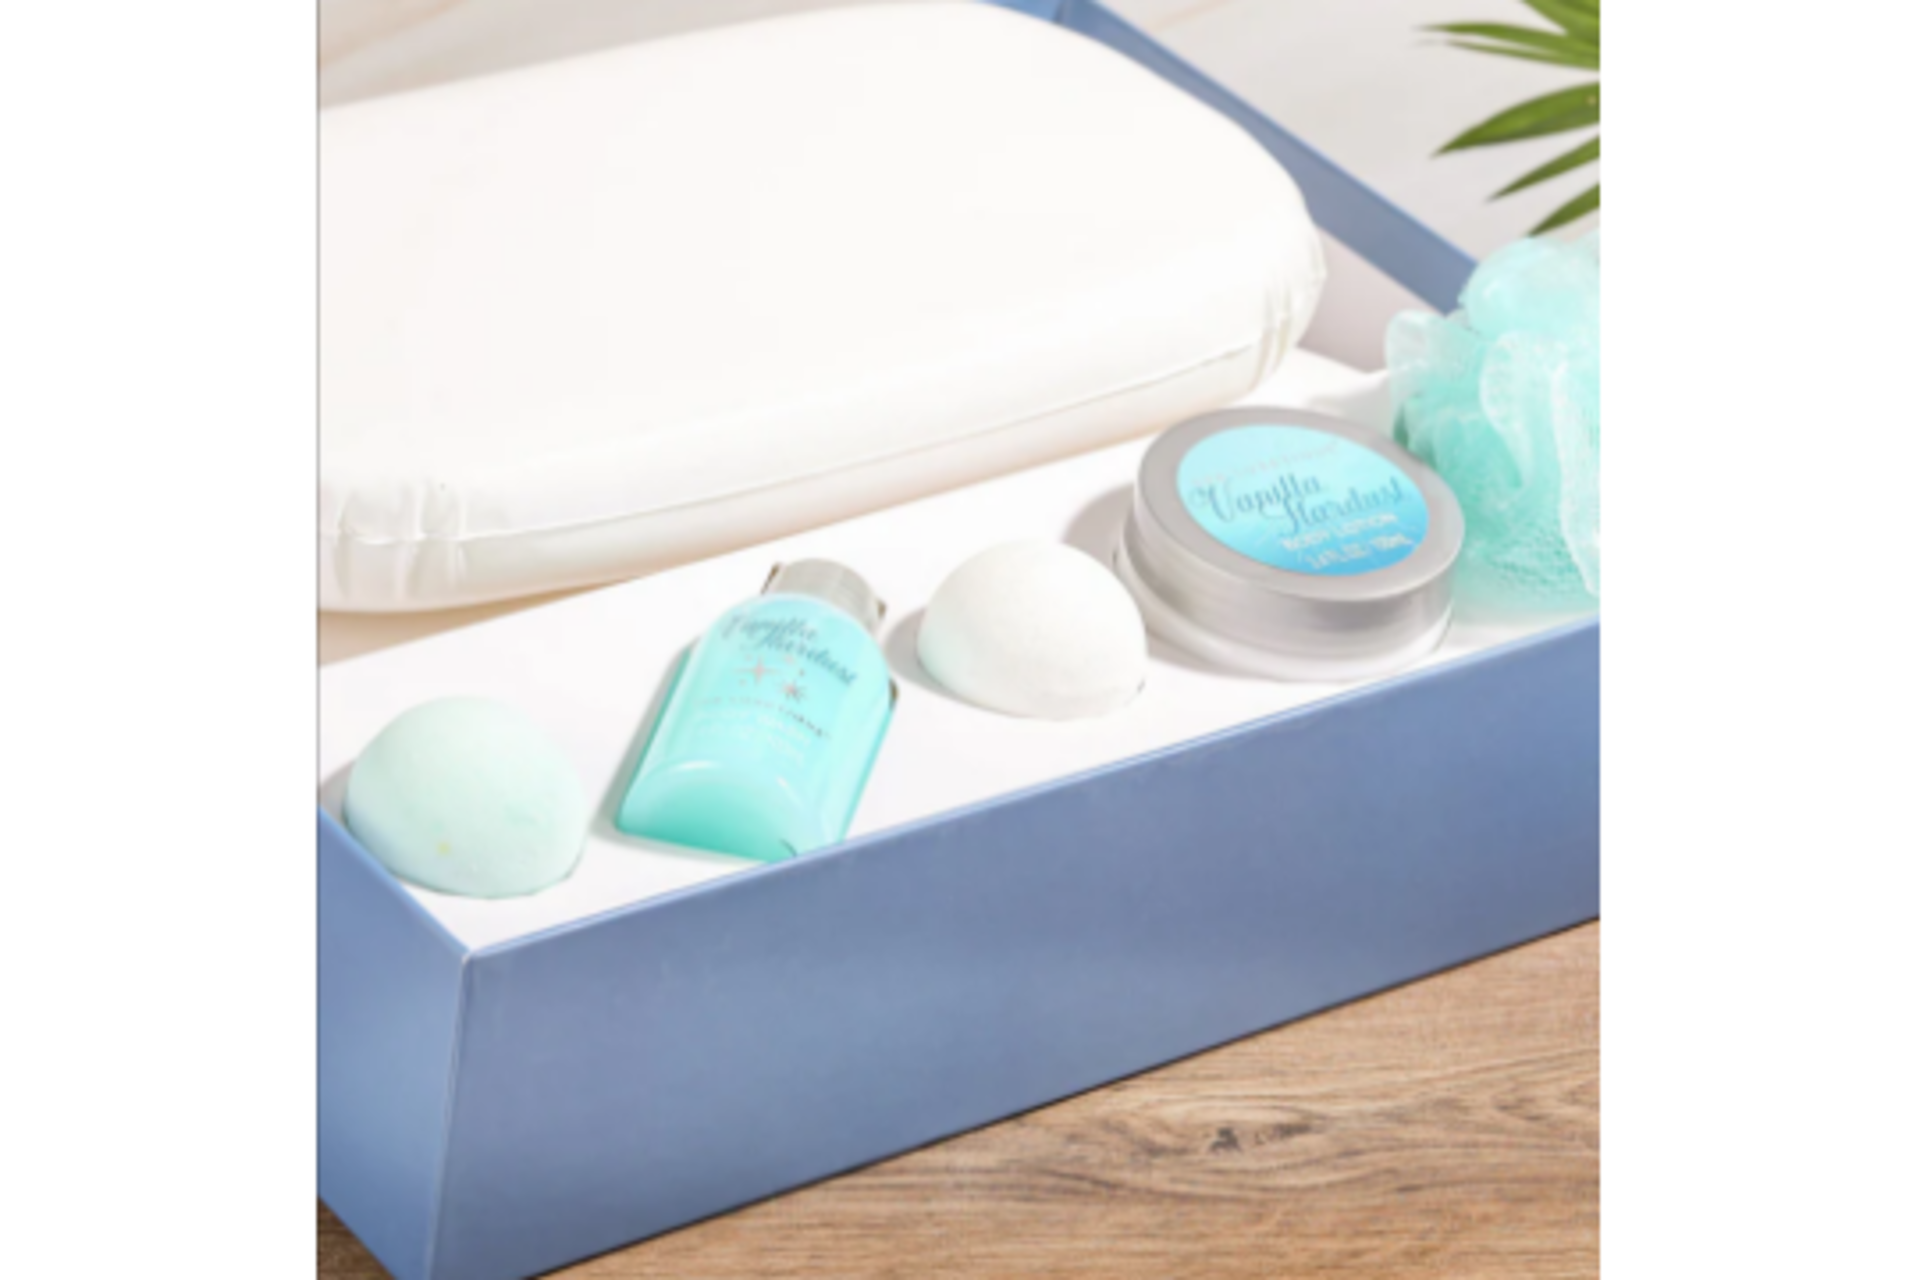 PALLET TO CONTAIN 24 x New Packaged Spa Luxetique Cosmic Dreams Vanilla Spa Gift Set. (SKU:SPA-BA- - Image 2 of 2